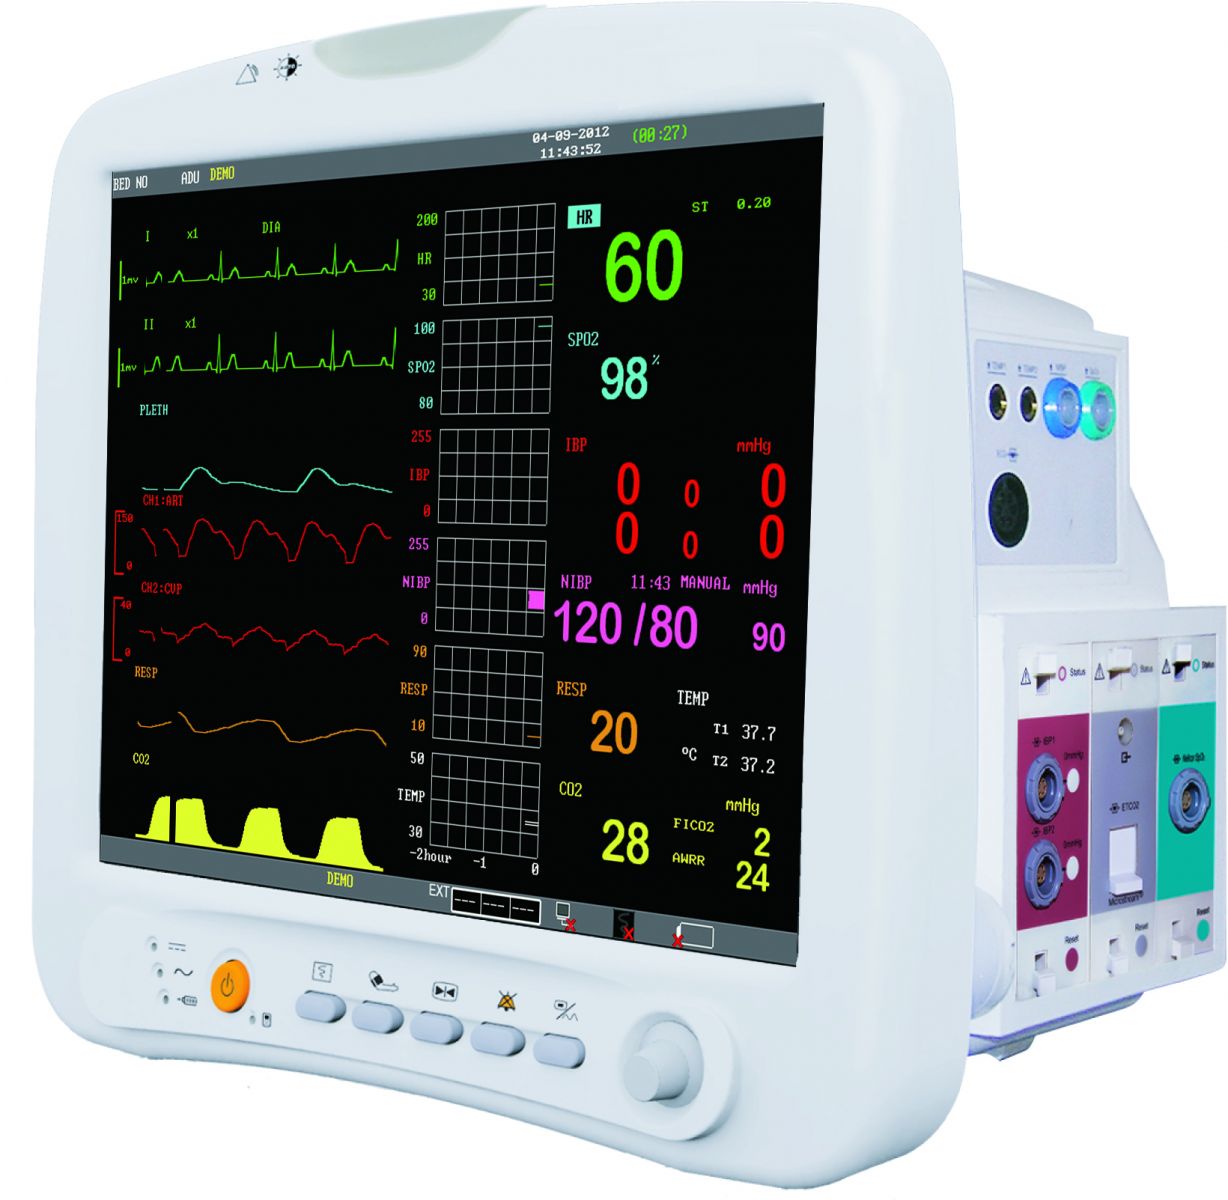 Modular Patient Monitor - Accessories & Patient Monitor